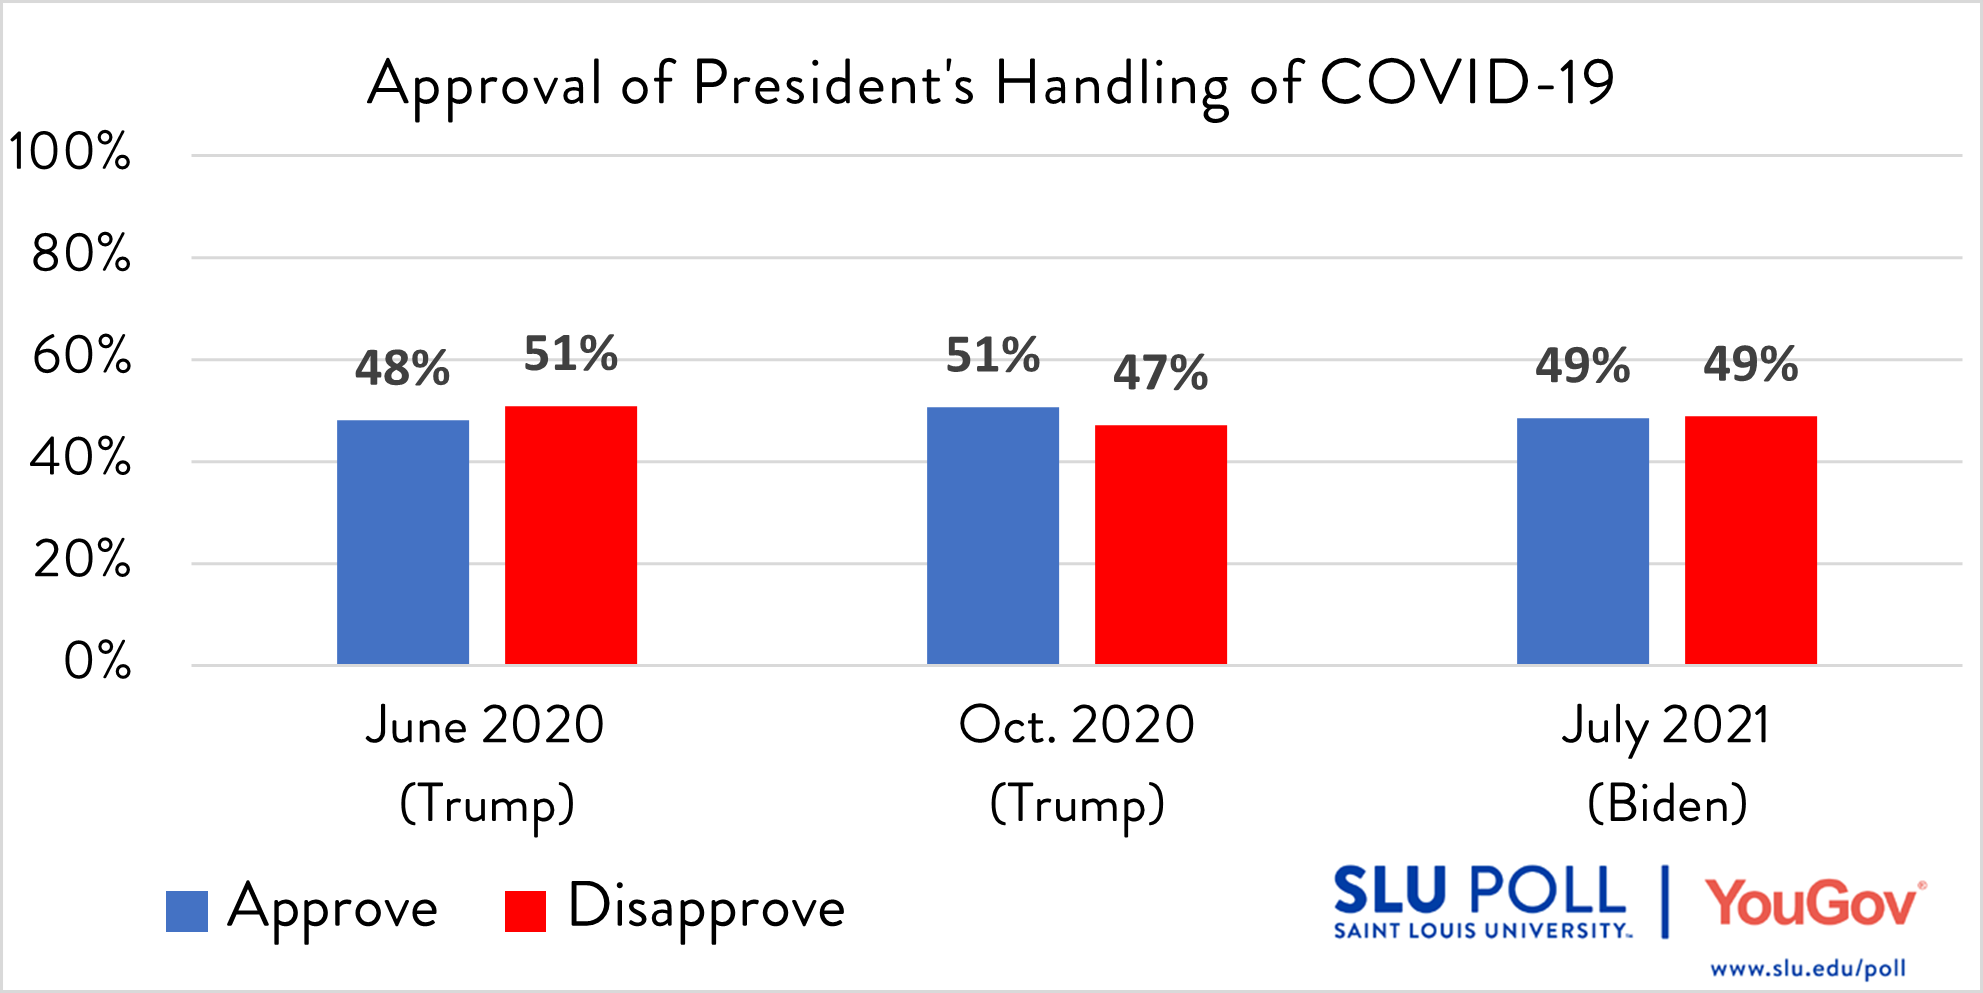 Do you approve or disapprove of the way each has handled the COVID-19 Pandemic… President Joe Biden? - Strongly approve: 26% - Approve: 22% - Disapprove: 15% - Strongly disapprove: 33%  - Not sure: 3% Subsample Question: The sample size for this question is 473. The margin of error for the full results for the above question is ± 5.81%.